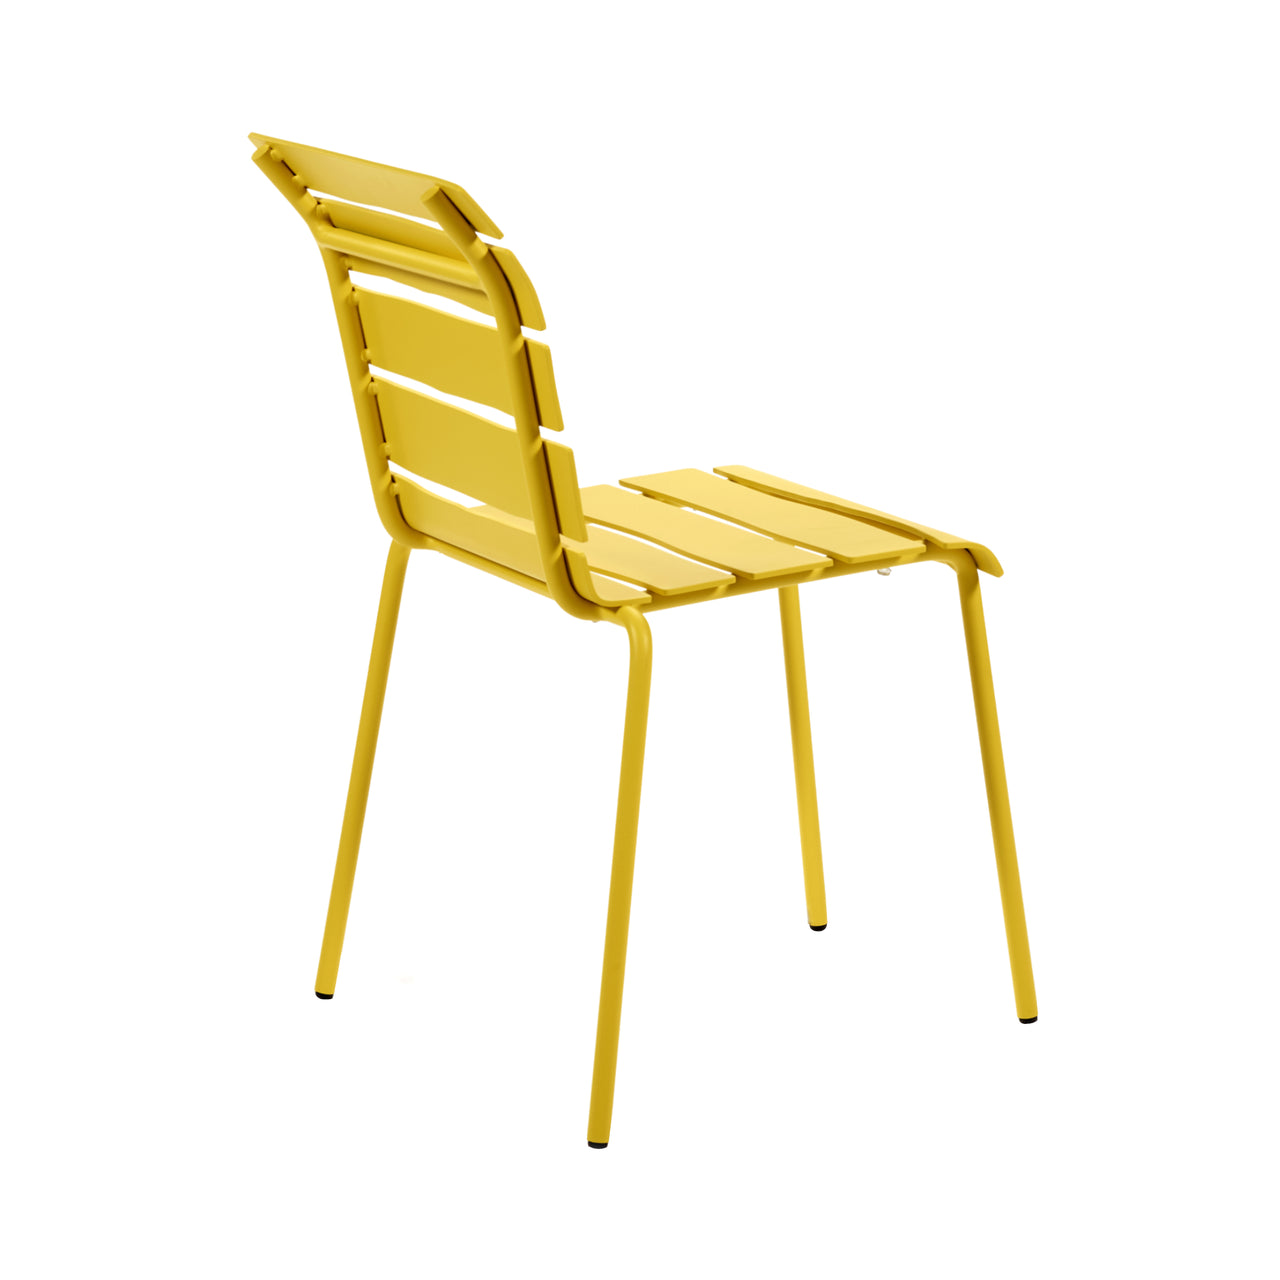 Aligned Outdoor Stacking Chair: Yellow + Without Arm